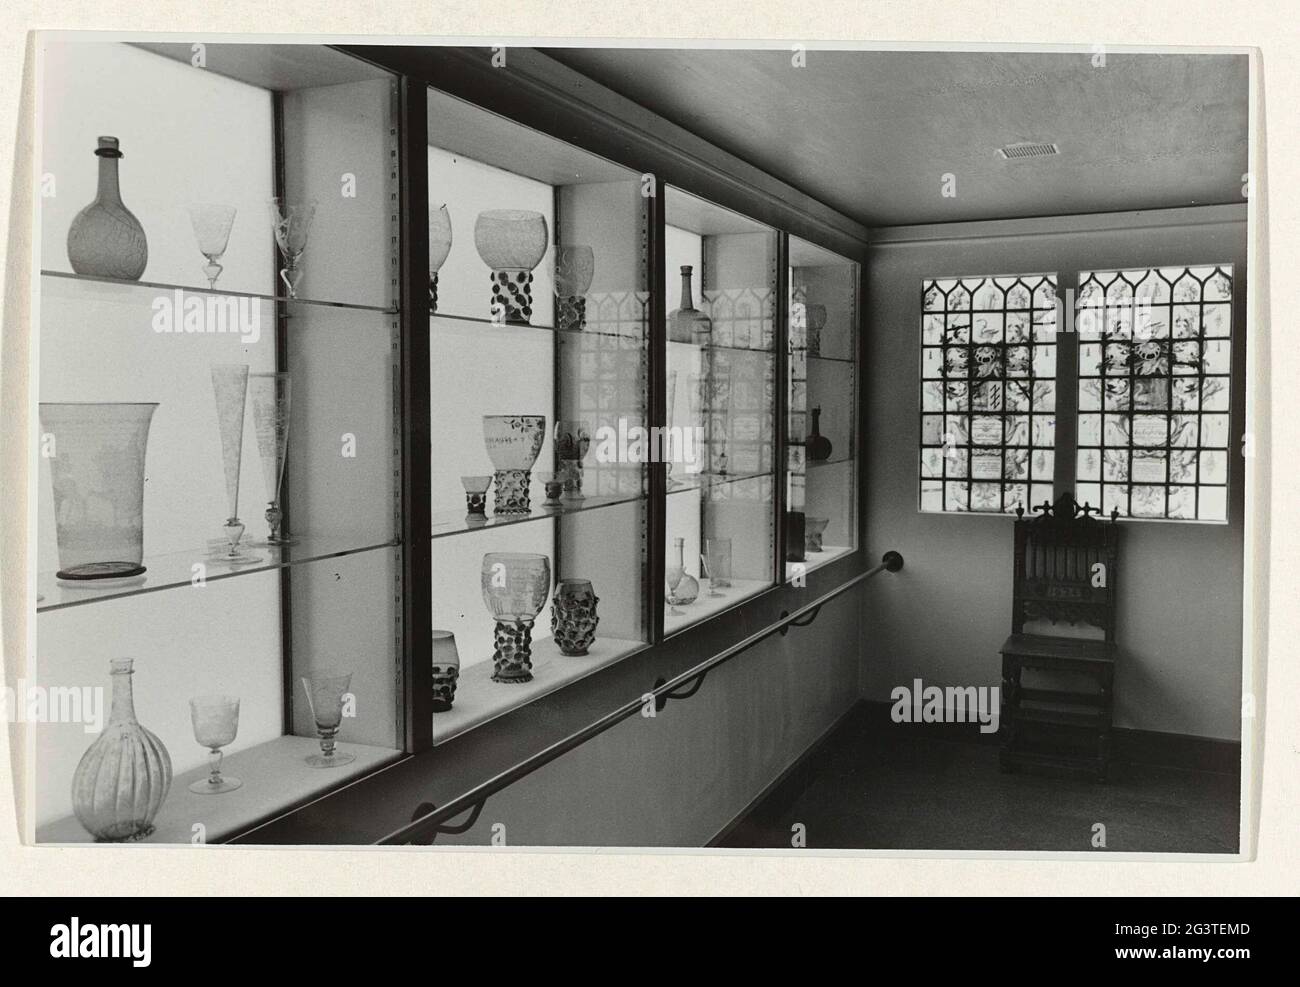 Room with arrangement of 17th century glassware in 1952. Room M253 (?) With 17th century glassware prepared in illuminated wall vitrins. On the back wall view of a double stained glass window. Modernization and redesign of approx. 60 rooms, Professional. FA. Eschaauzier and Bart castle. It concerned the halls sculpture / arts and crafts (XVIII), study collection, exhibition Rijkspentencabinet and public restaurant with kitchen. Stock Photo